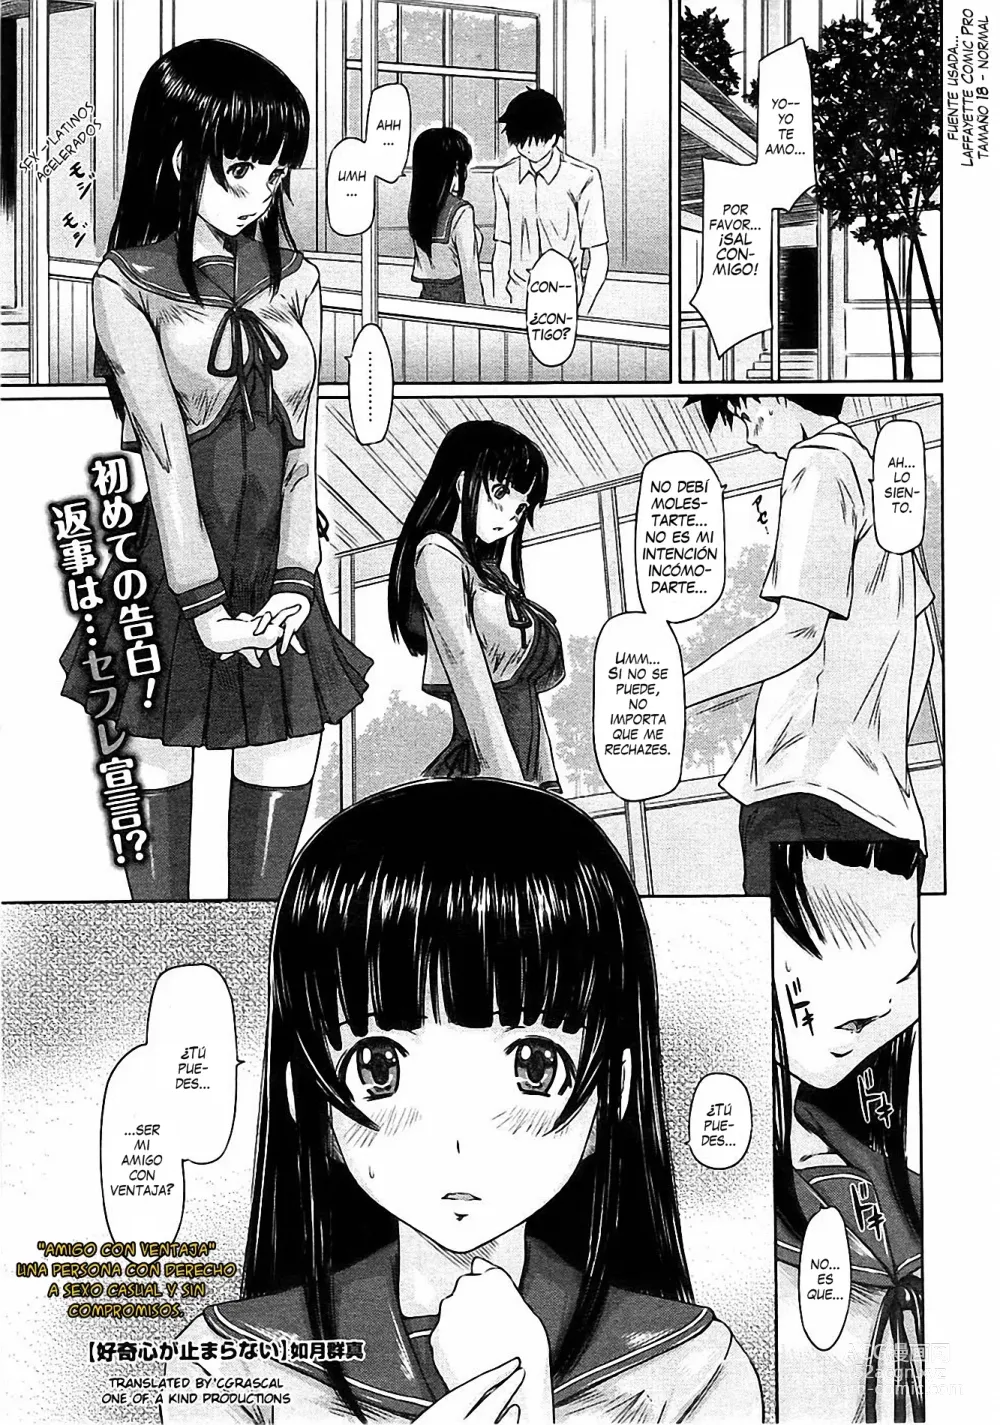 Page 1 of manga Curiosity Never Stops.